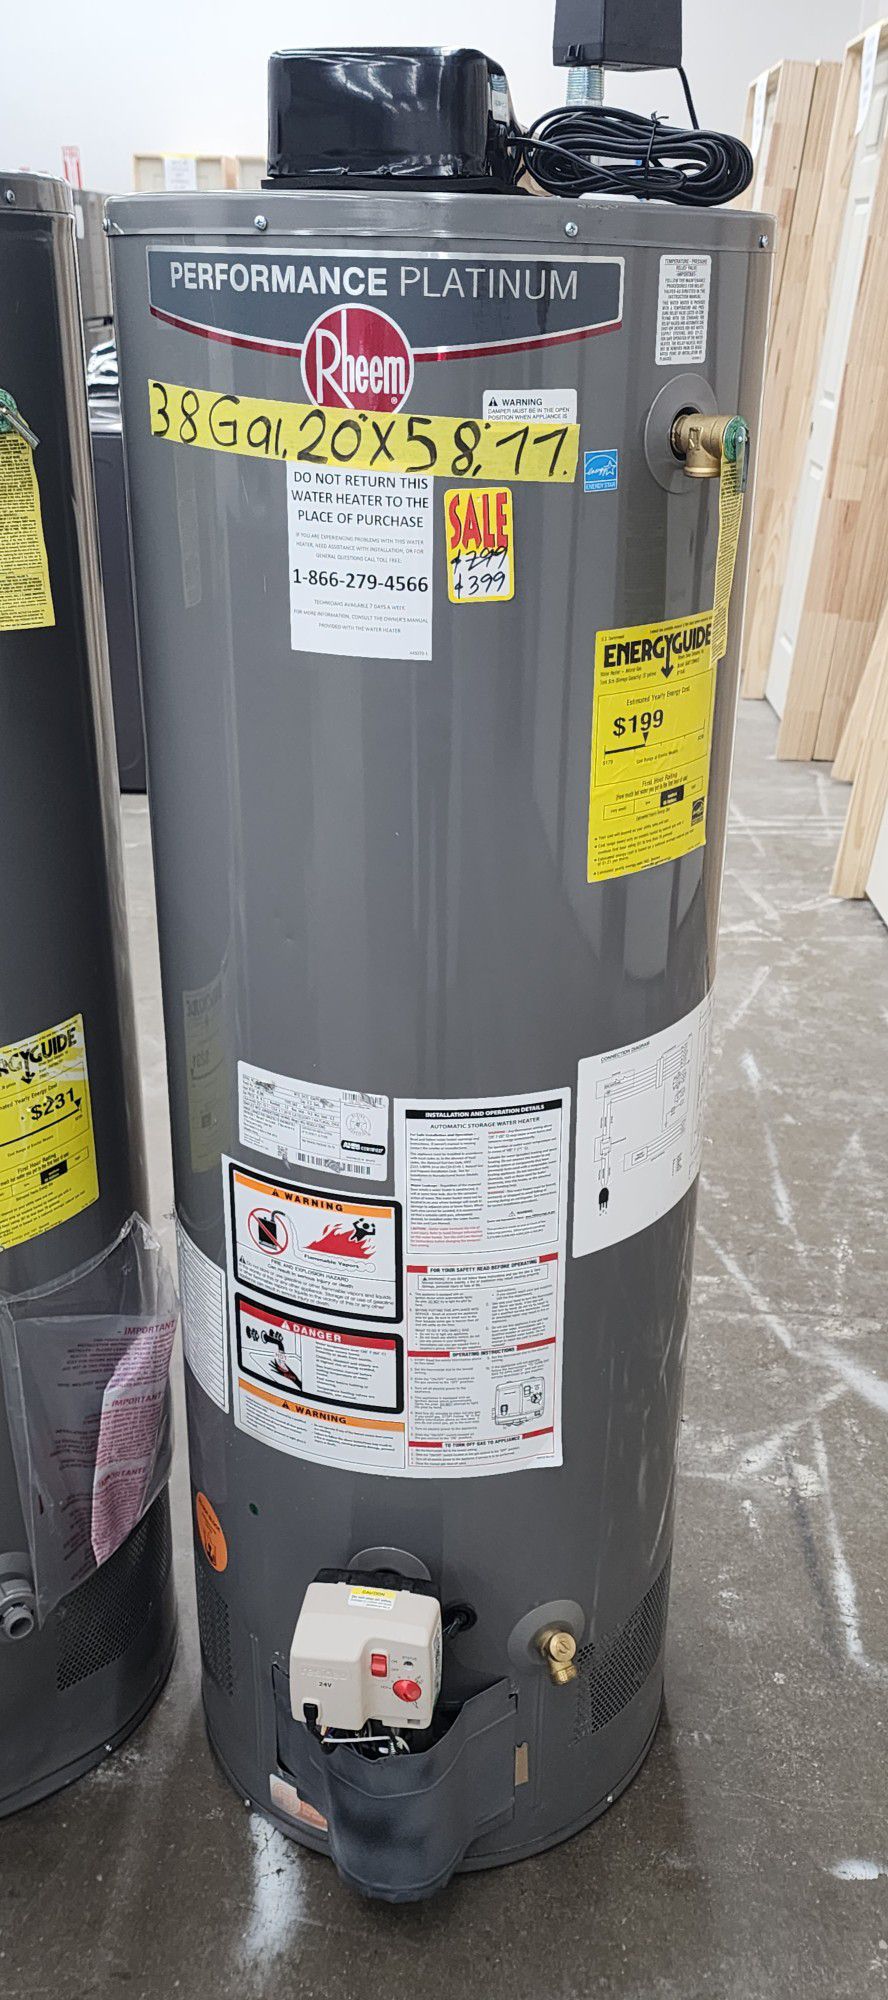 New Water Heater Nat Gas Rheem 38 Gallons with Warranty 